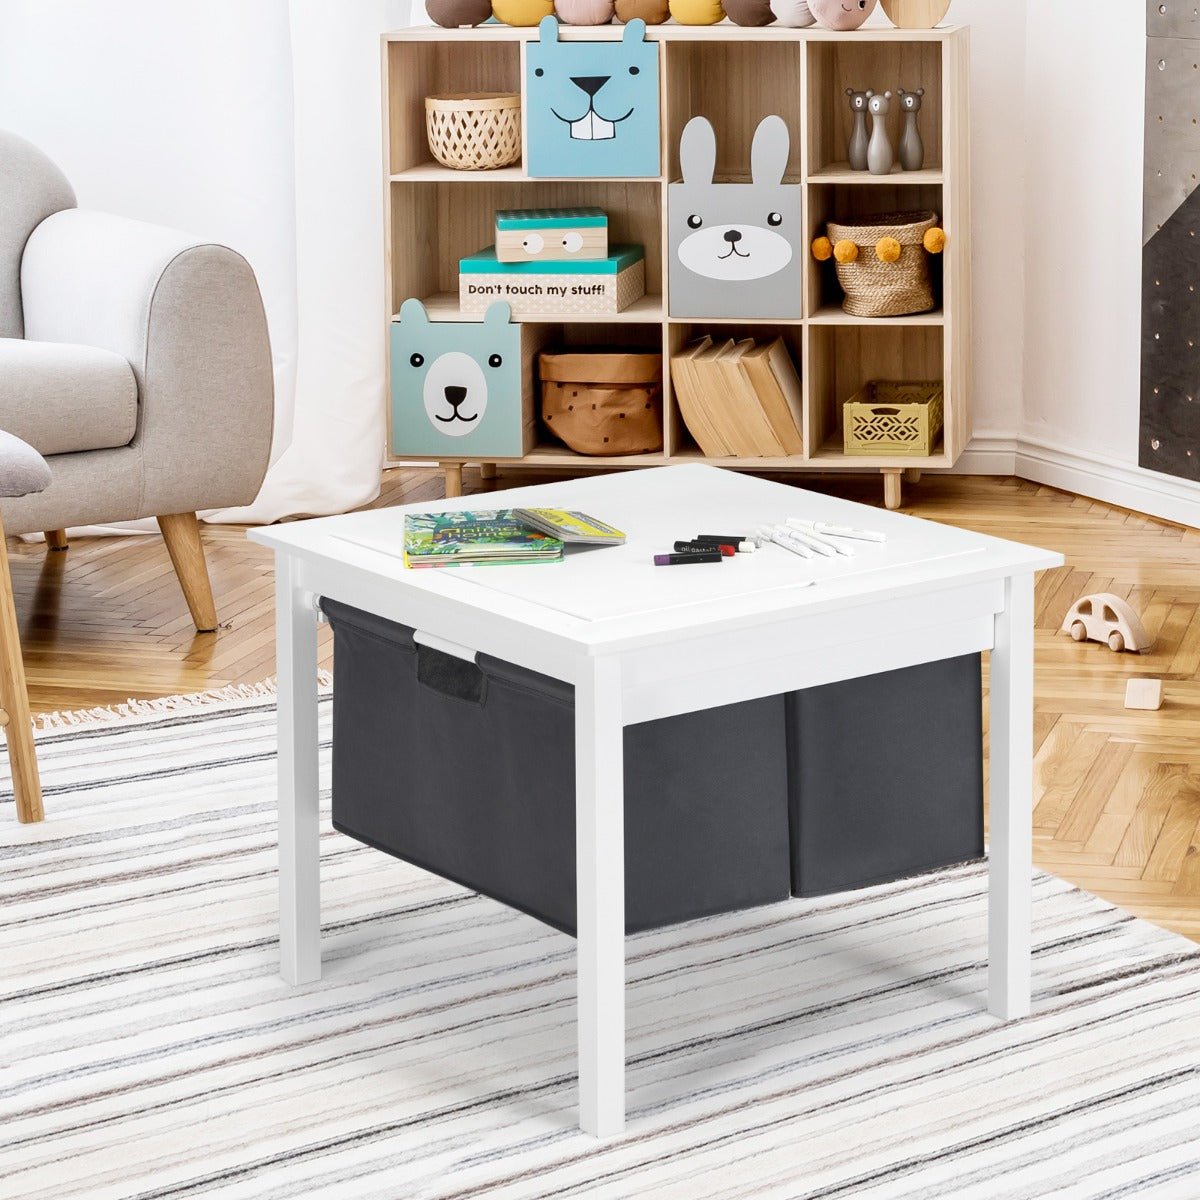 White Kids Activity Table: Where Playfulness Meets Neatness